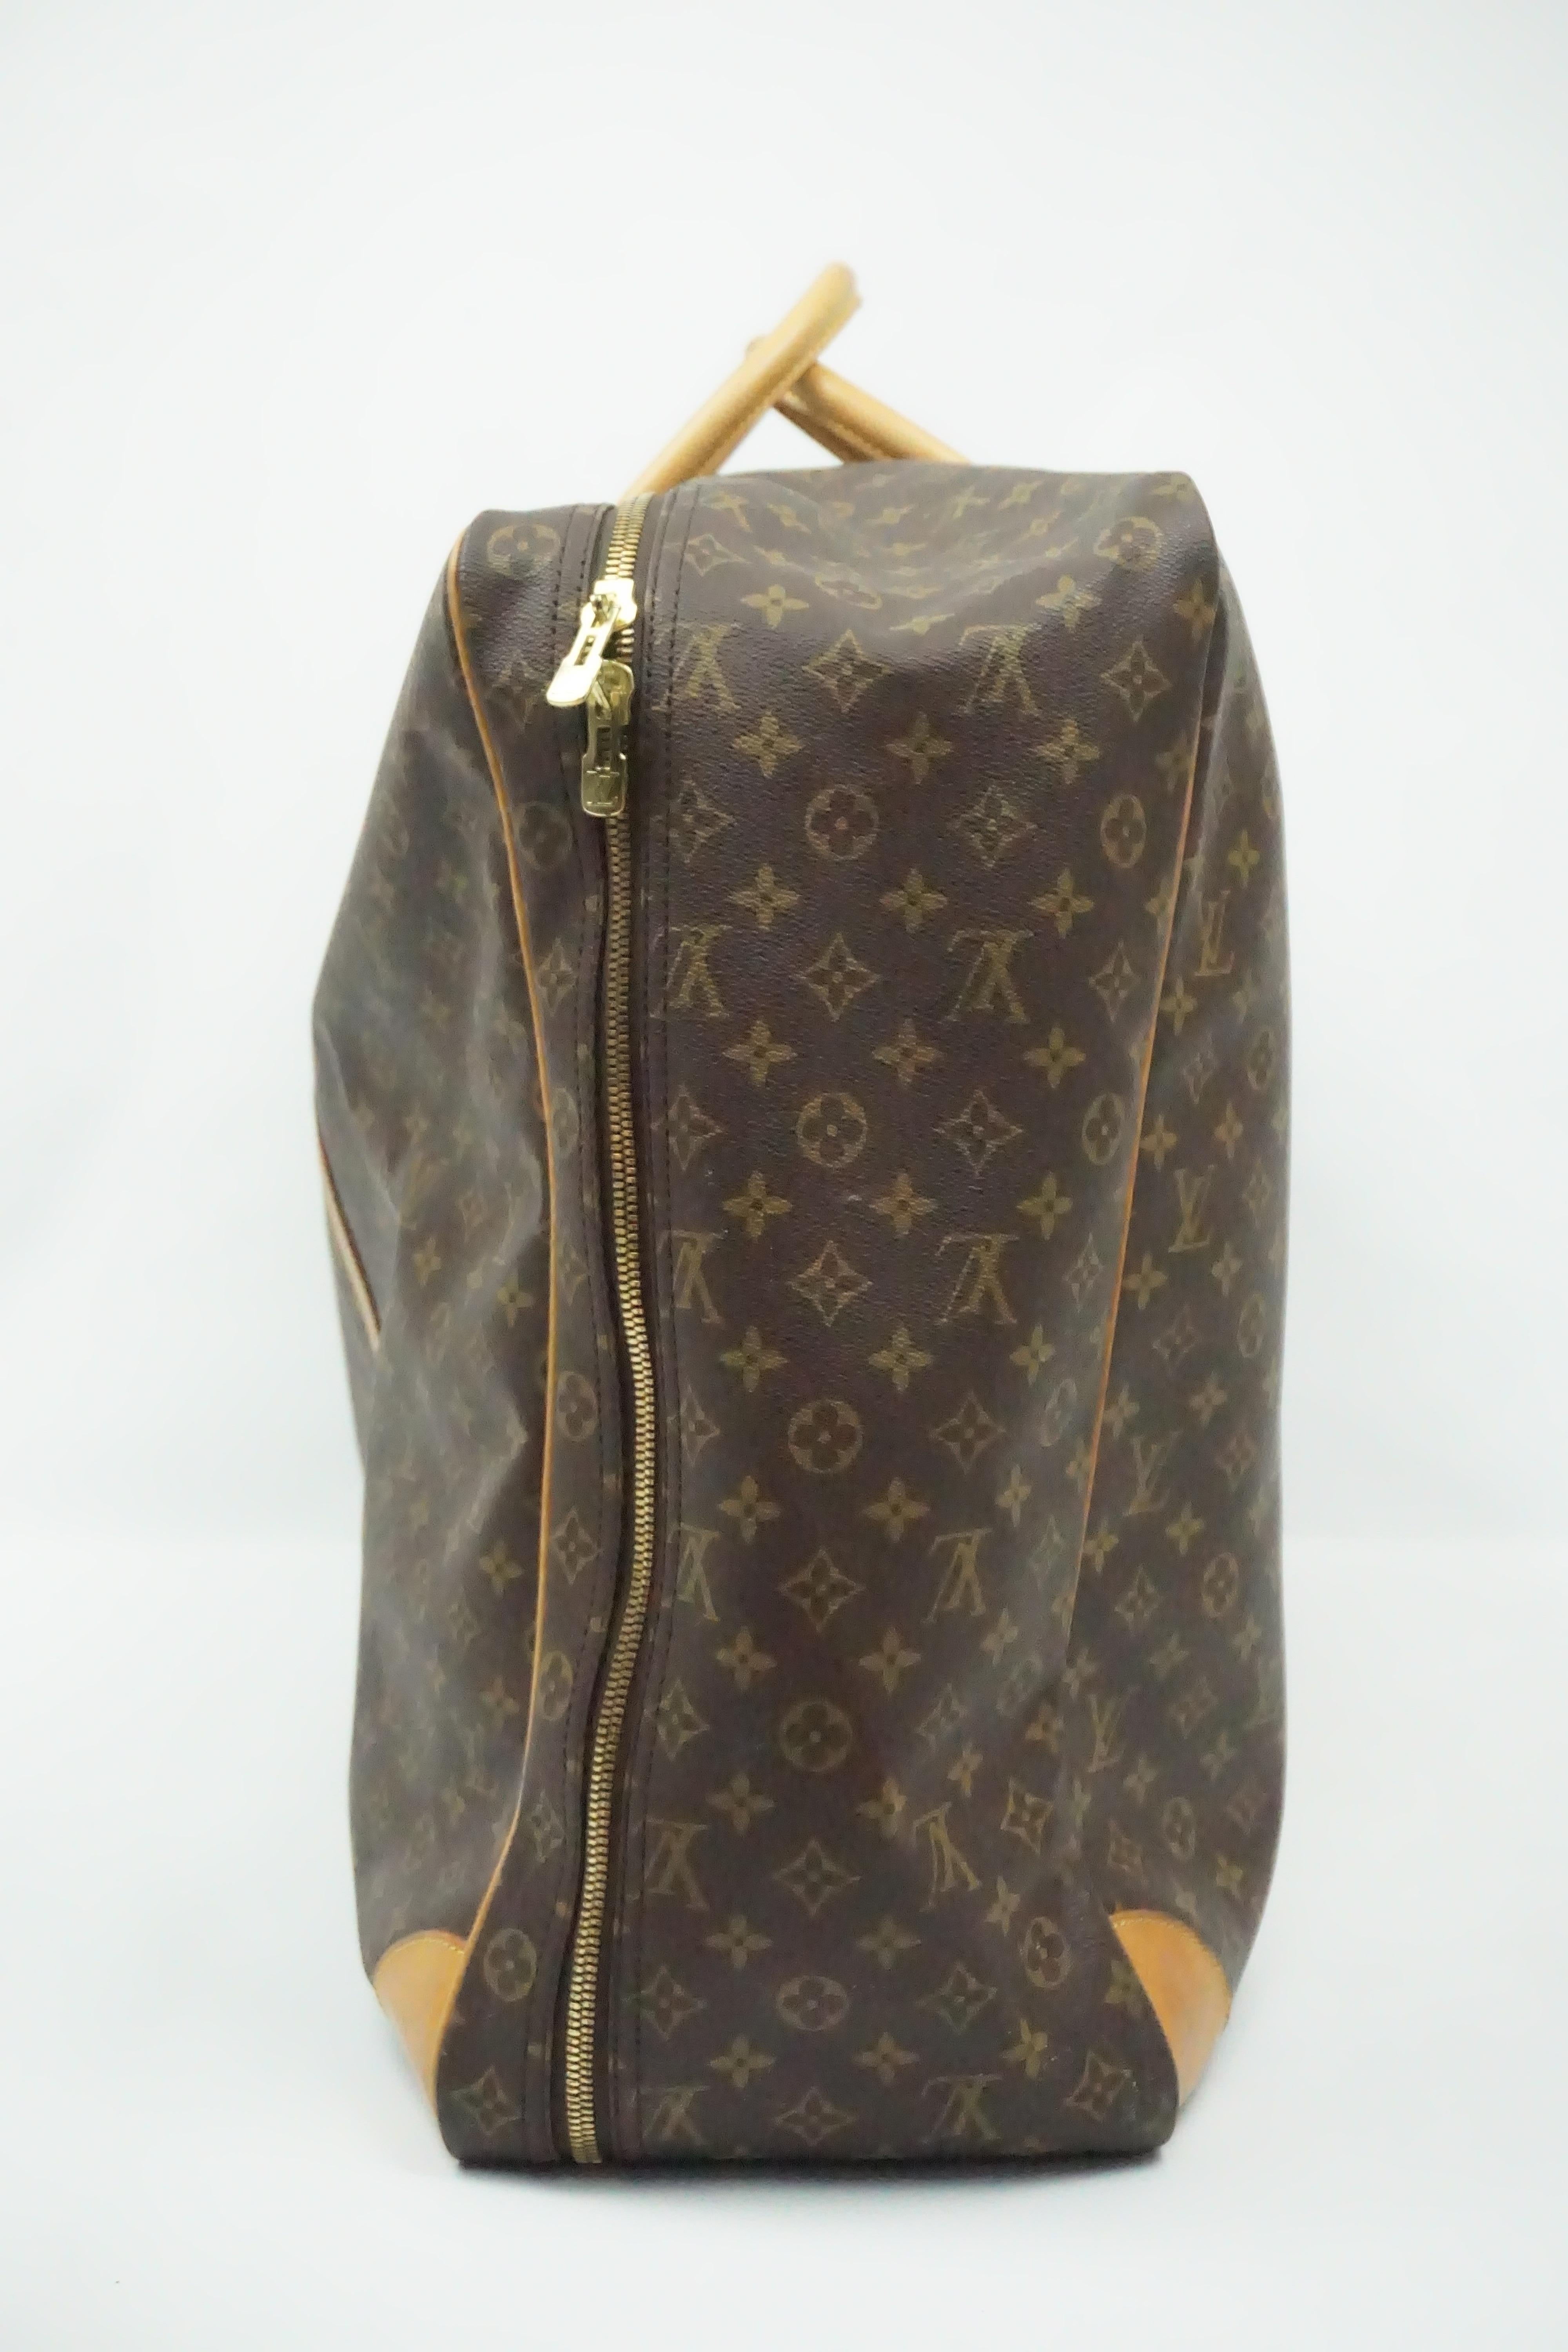 Louis Vuitton Monogram Sirius 70 Large Luggage This beautiful luggage is in good condition. The luggage does have some wear to it but still looks good as new. There are two beige handles and two beige leather strips running down the front. There is